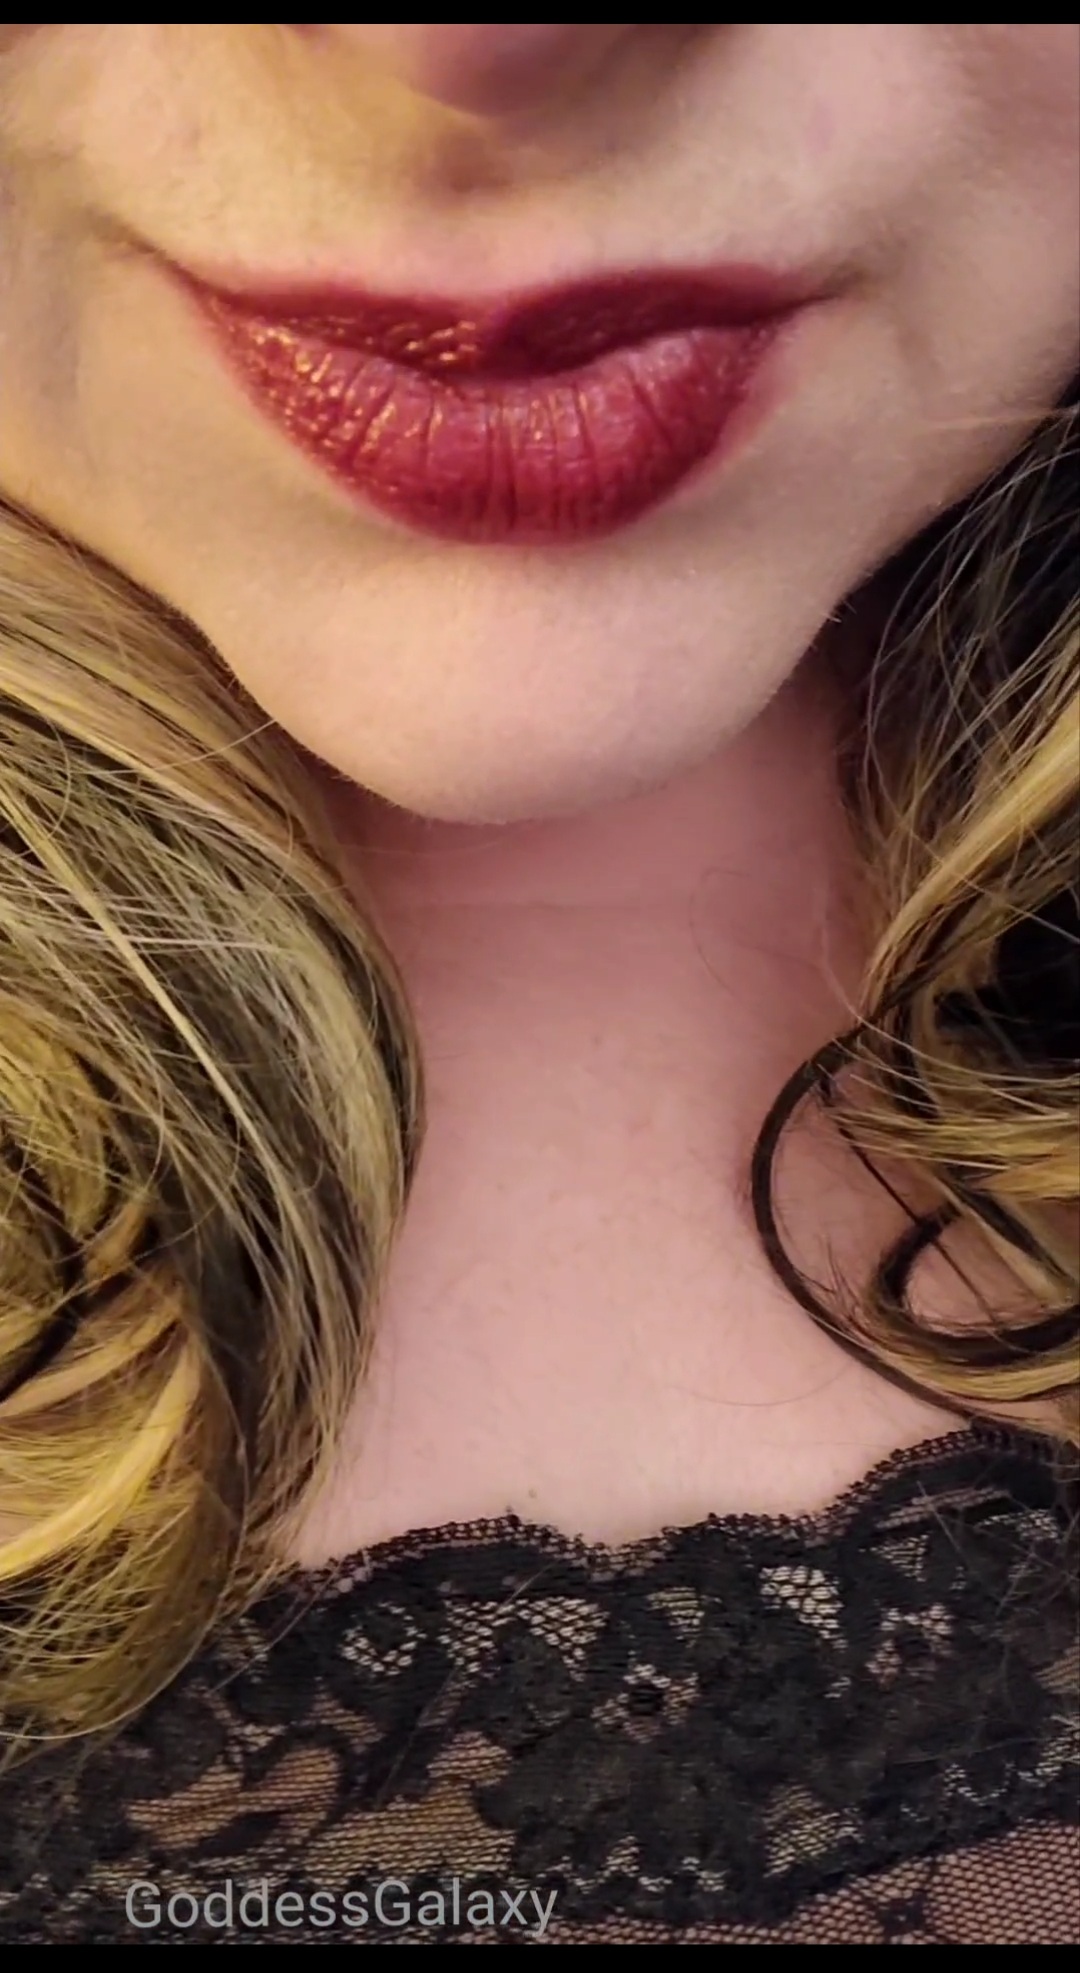 POV blowjob with dark lips and long red nails